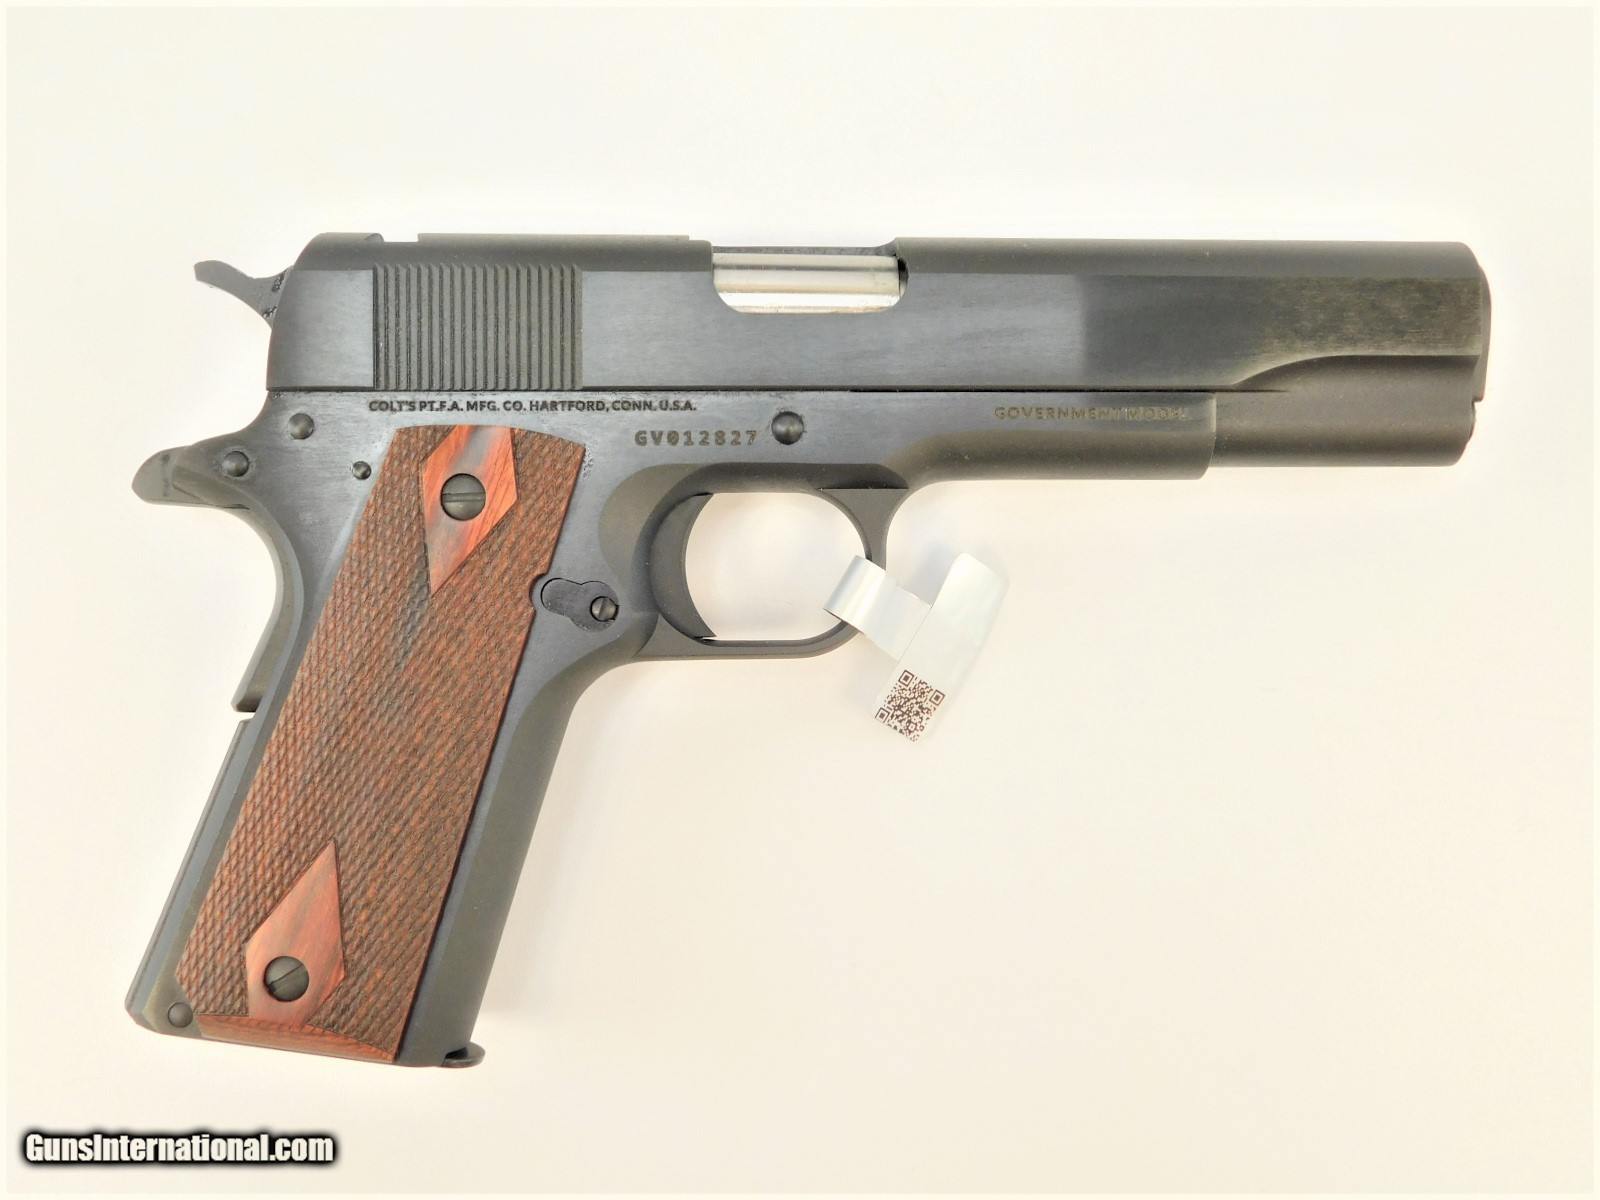 Colt-Series-70-Government-Model-1911-Blued-5inch-45-ACP-No-Rollmarks_101478339_23034_83A5D849F283899A.JPG